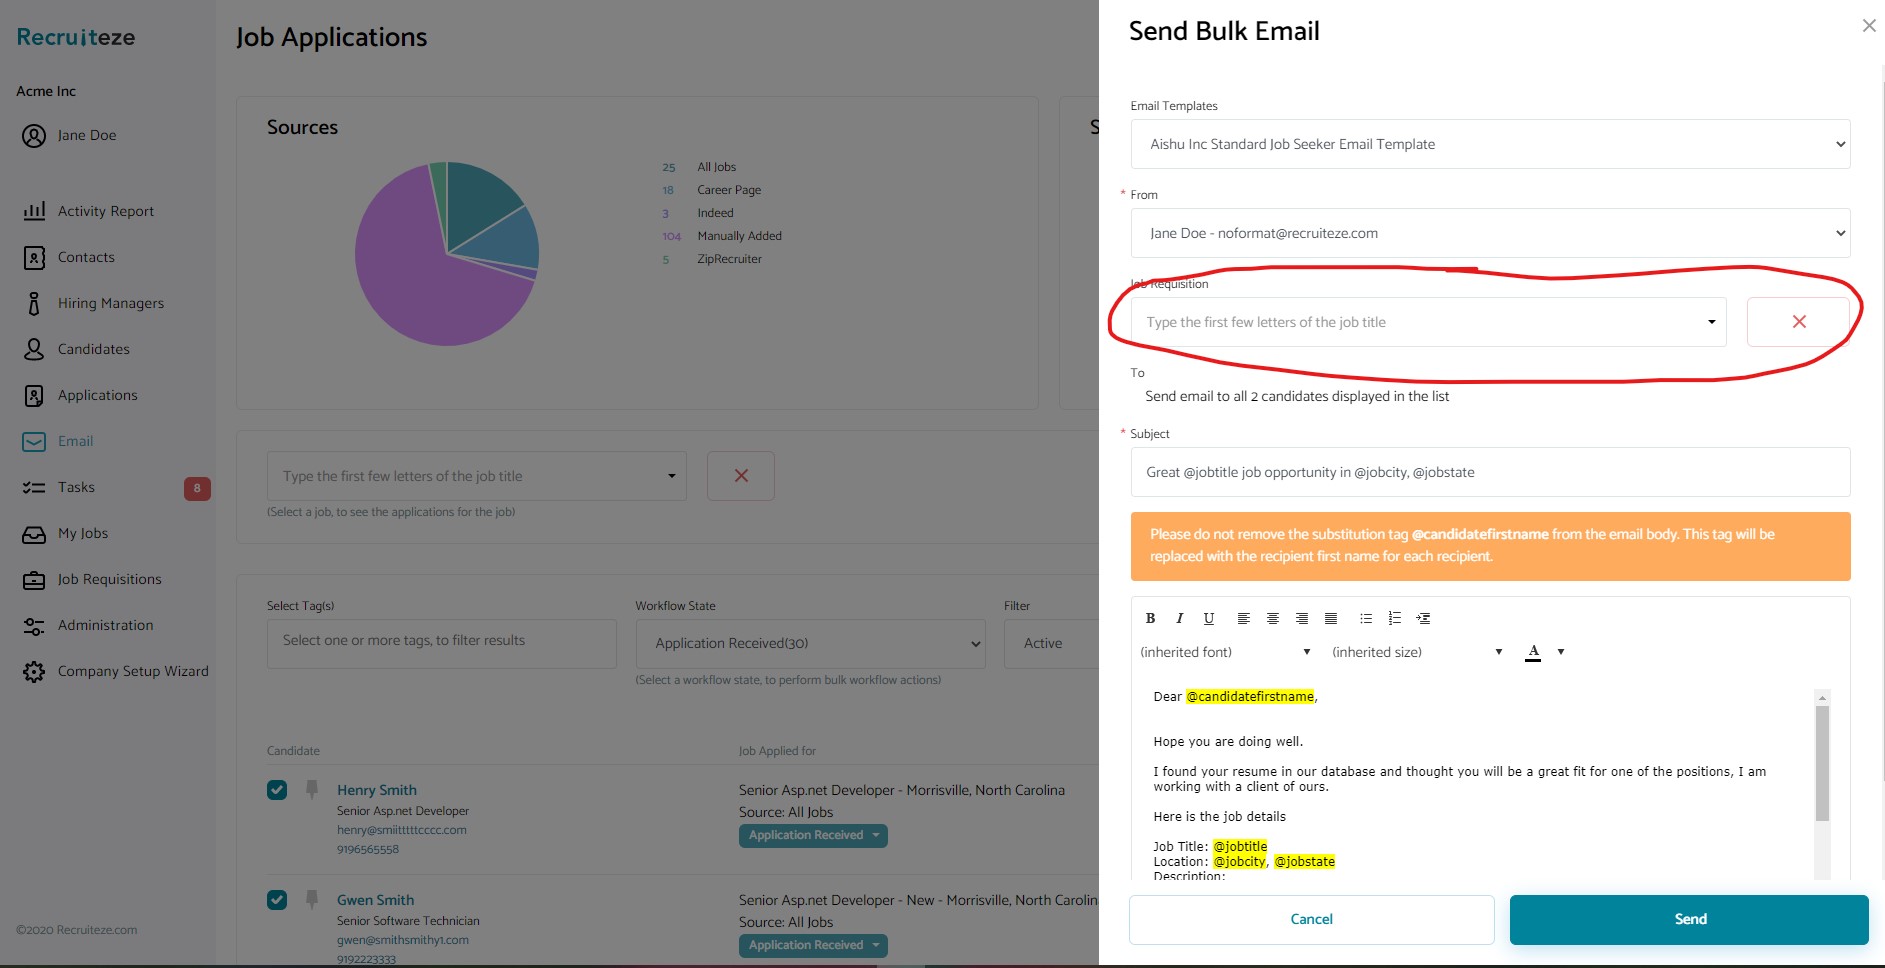 Applicant Tracking System: Bulk Email View